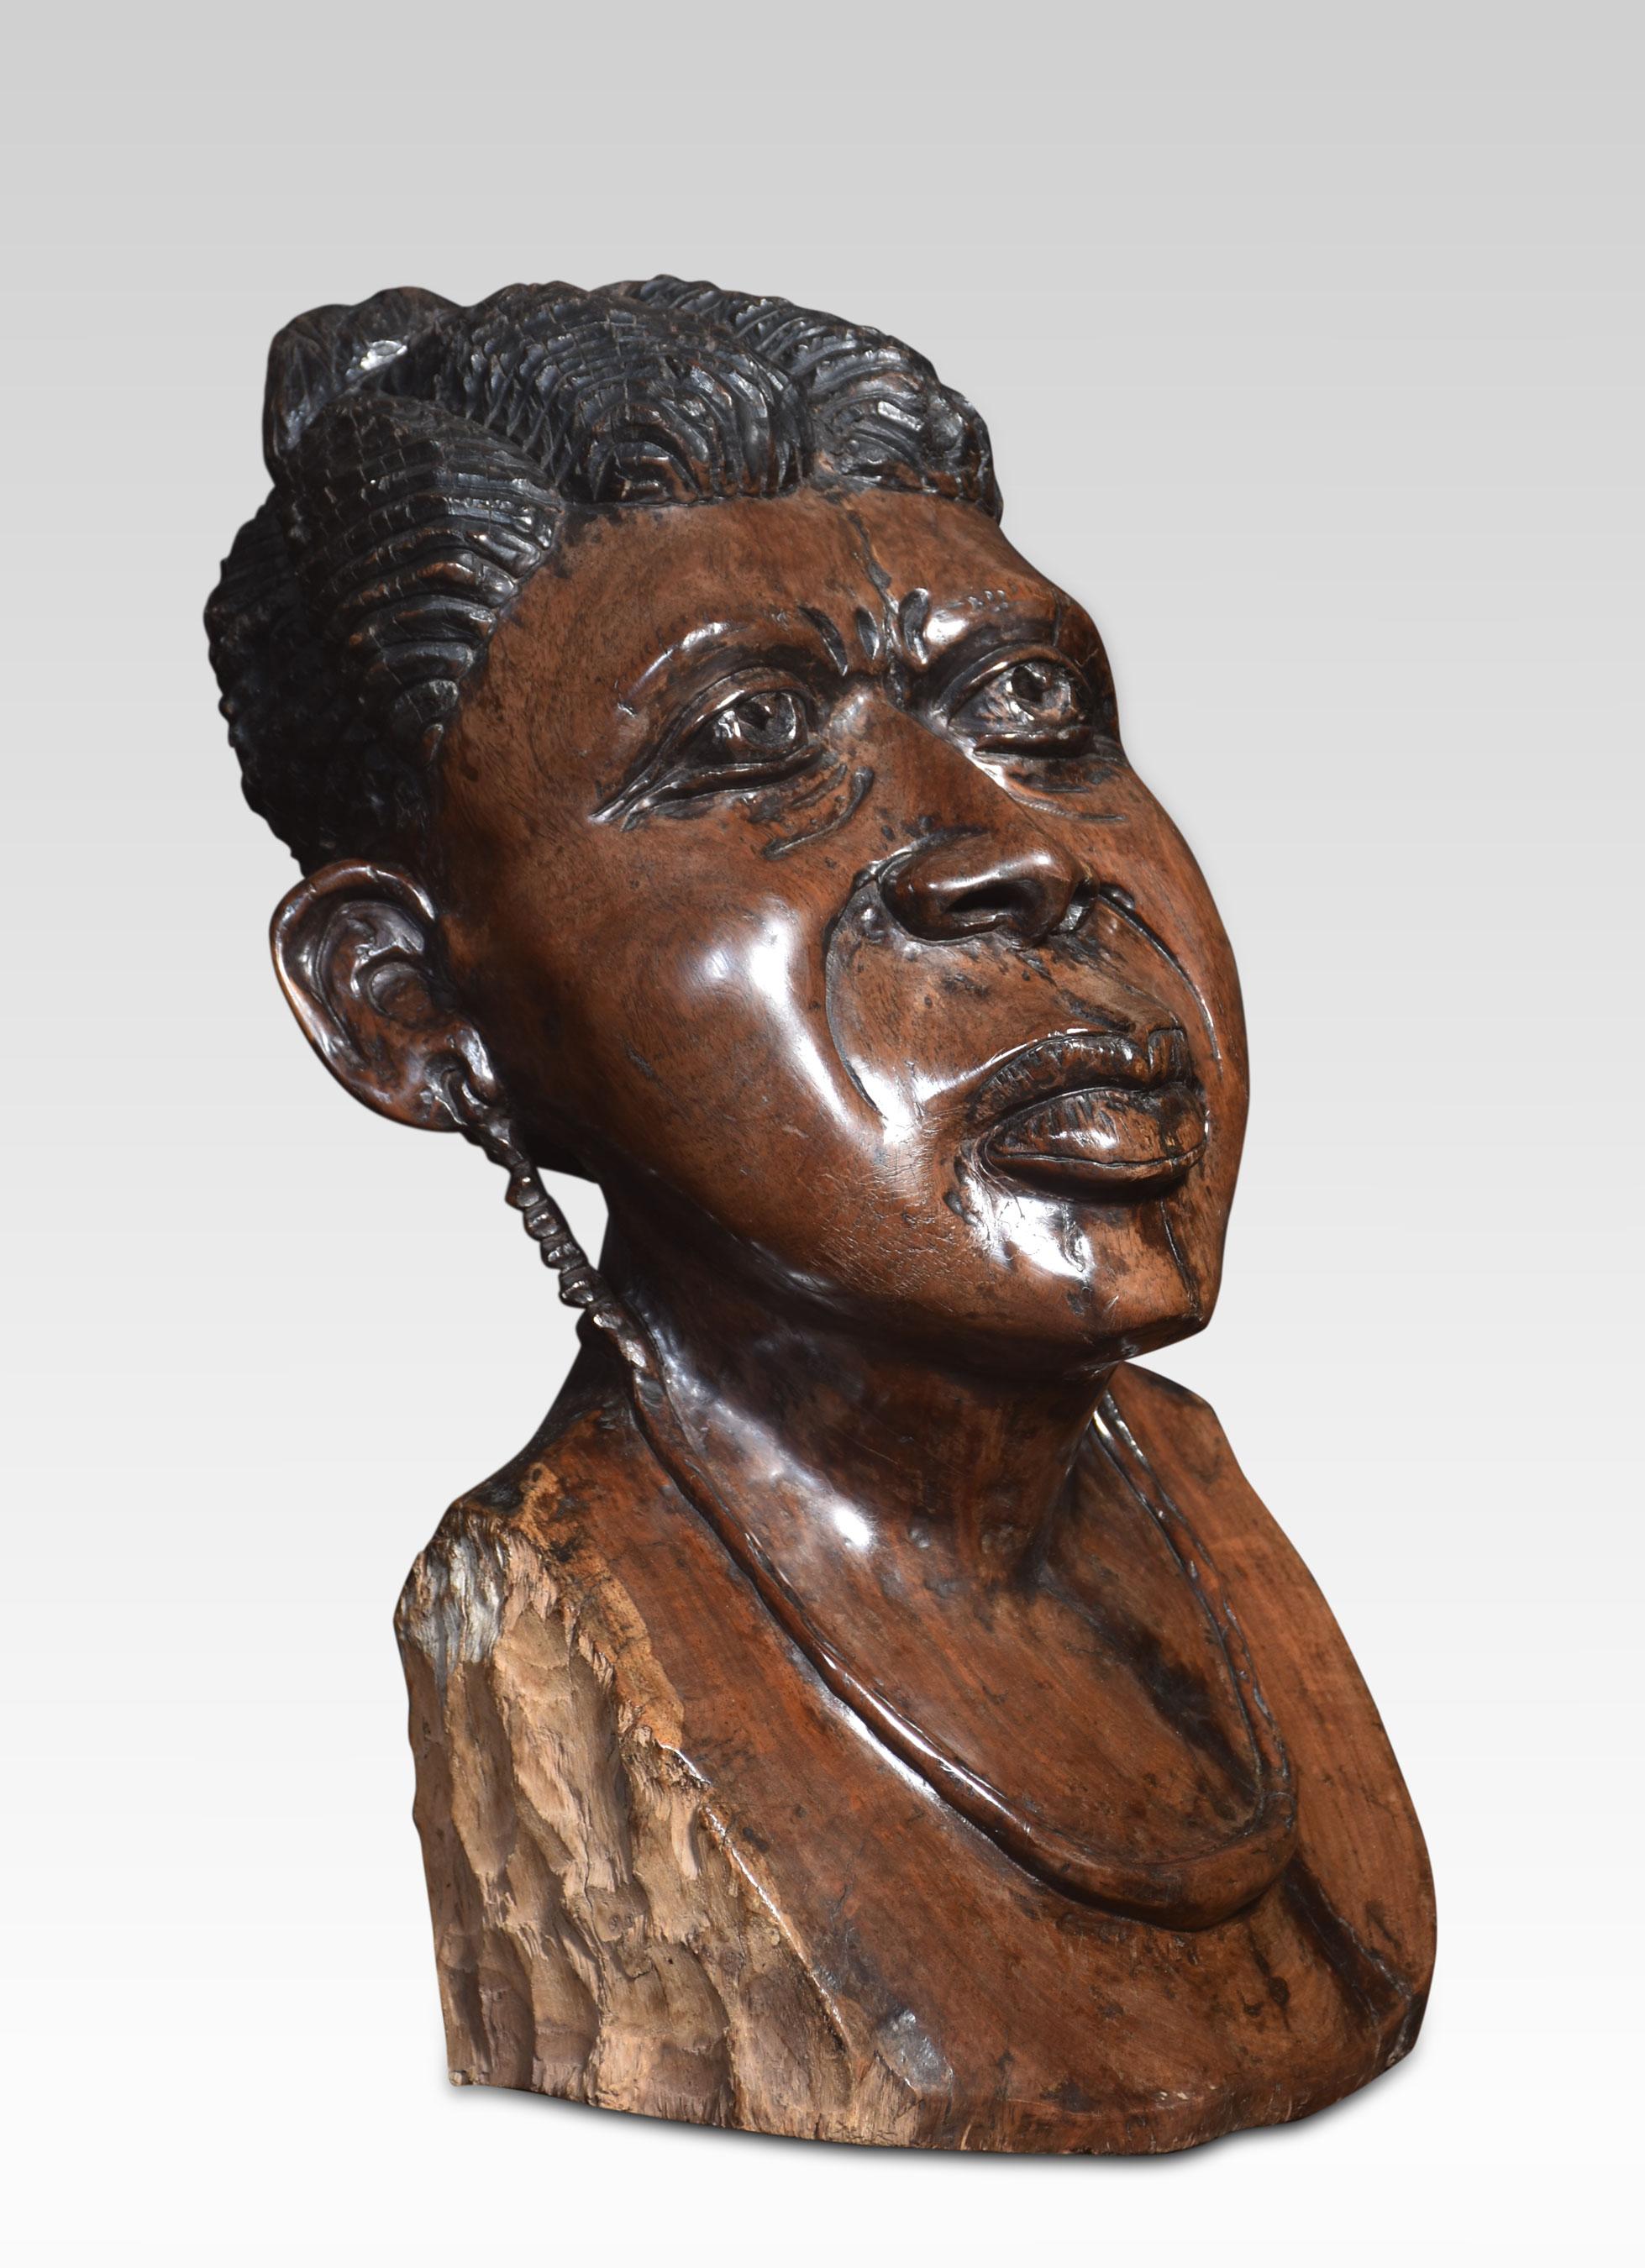 Finely carved wooden bust of a striking tribeswoman figure carved from an exotic hardwood with a rich patina free standing.
Dimensions
Height 22 Inches
Width 13 Inches
Depth 17 Inches